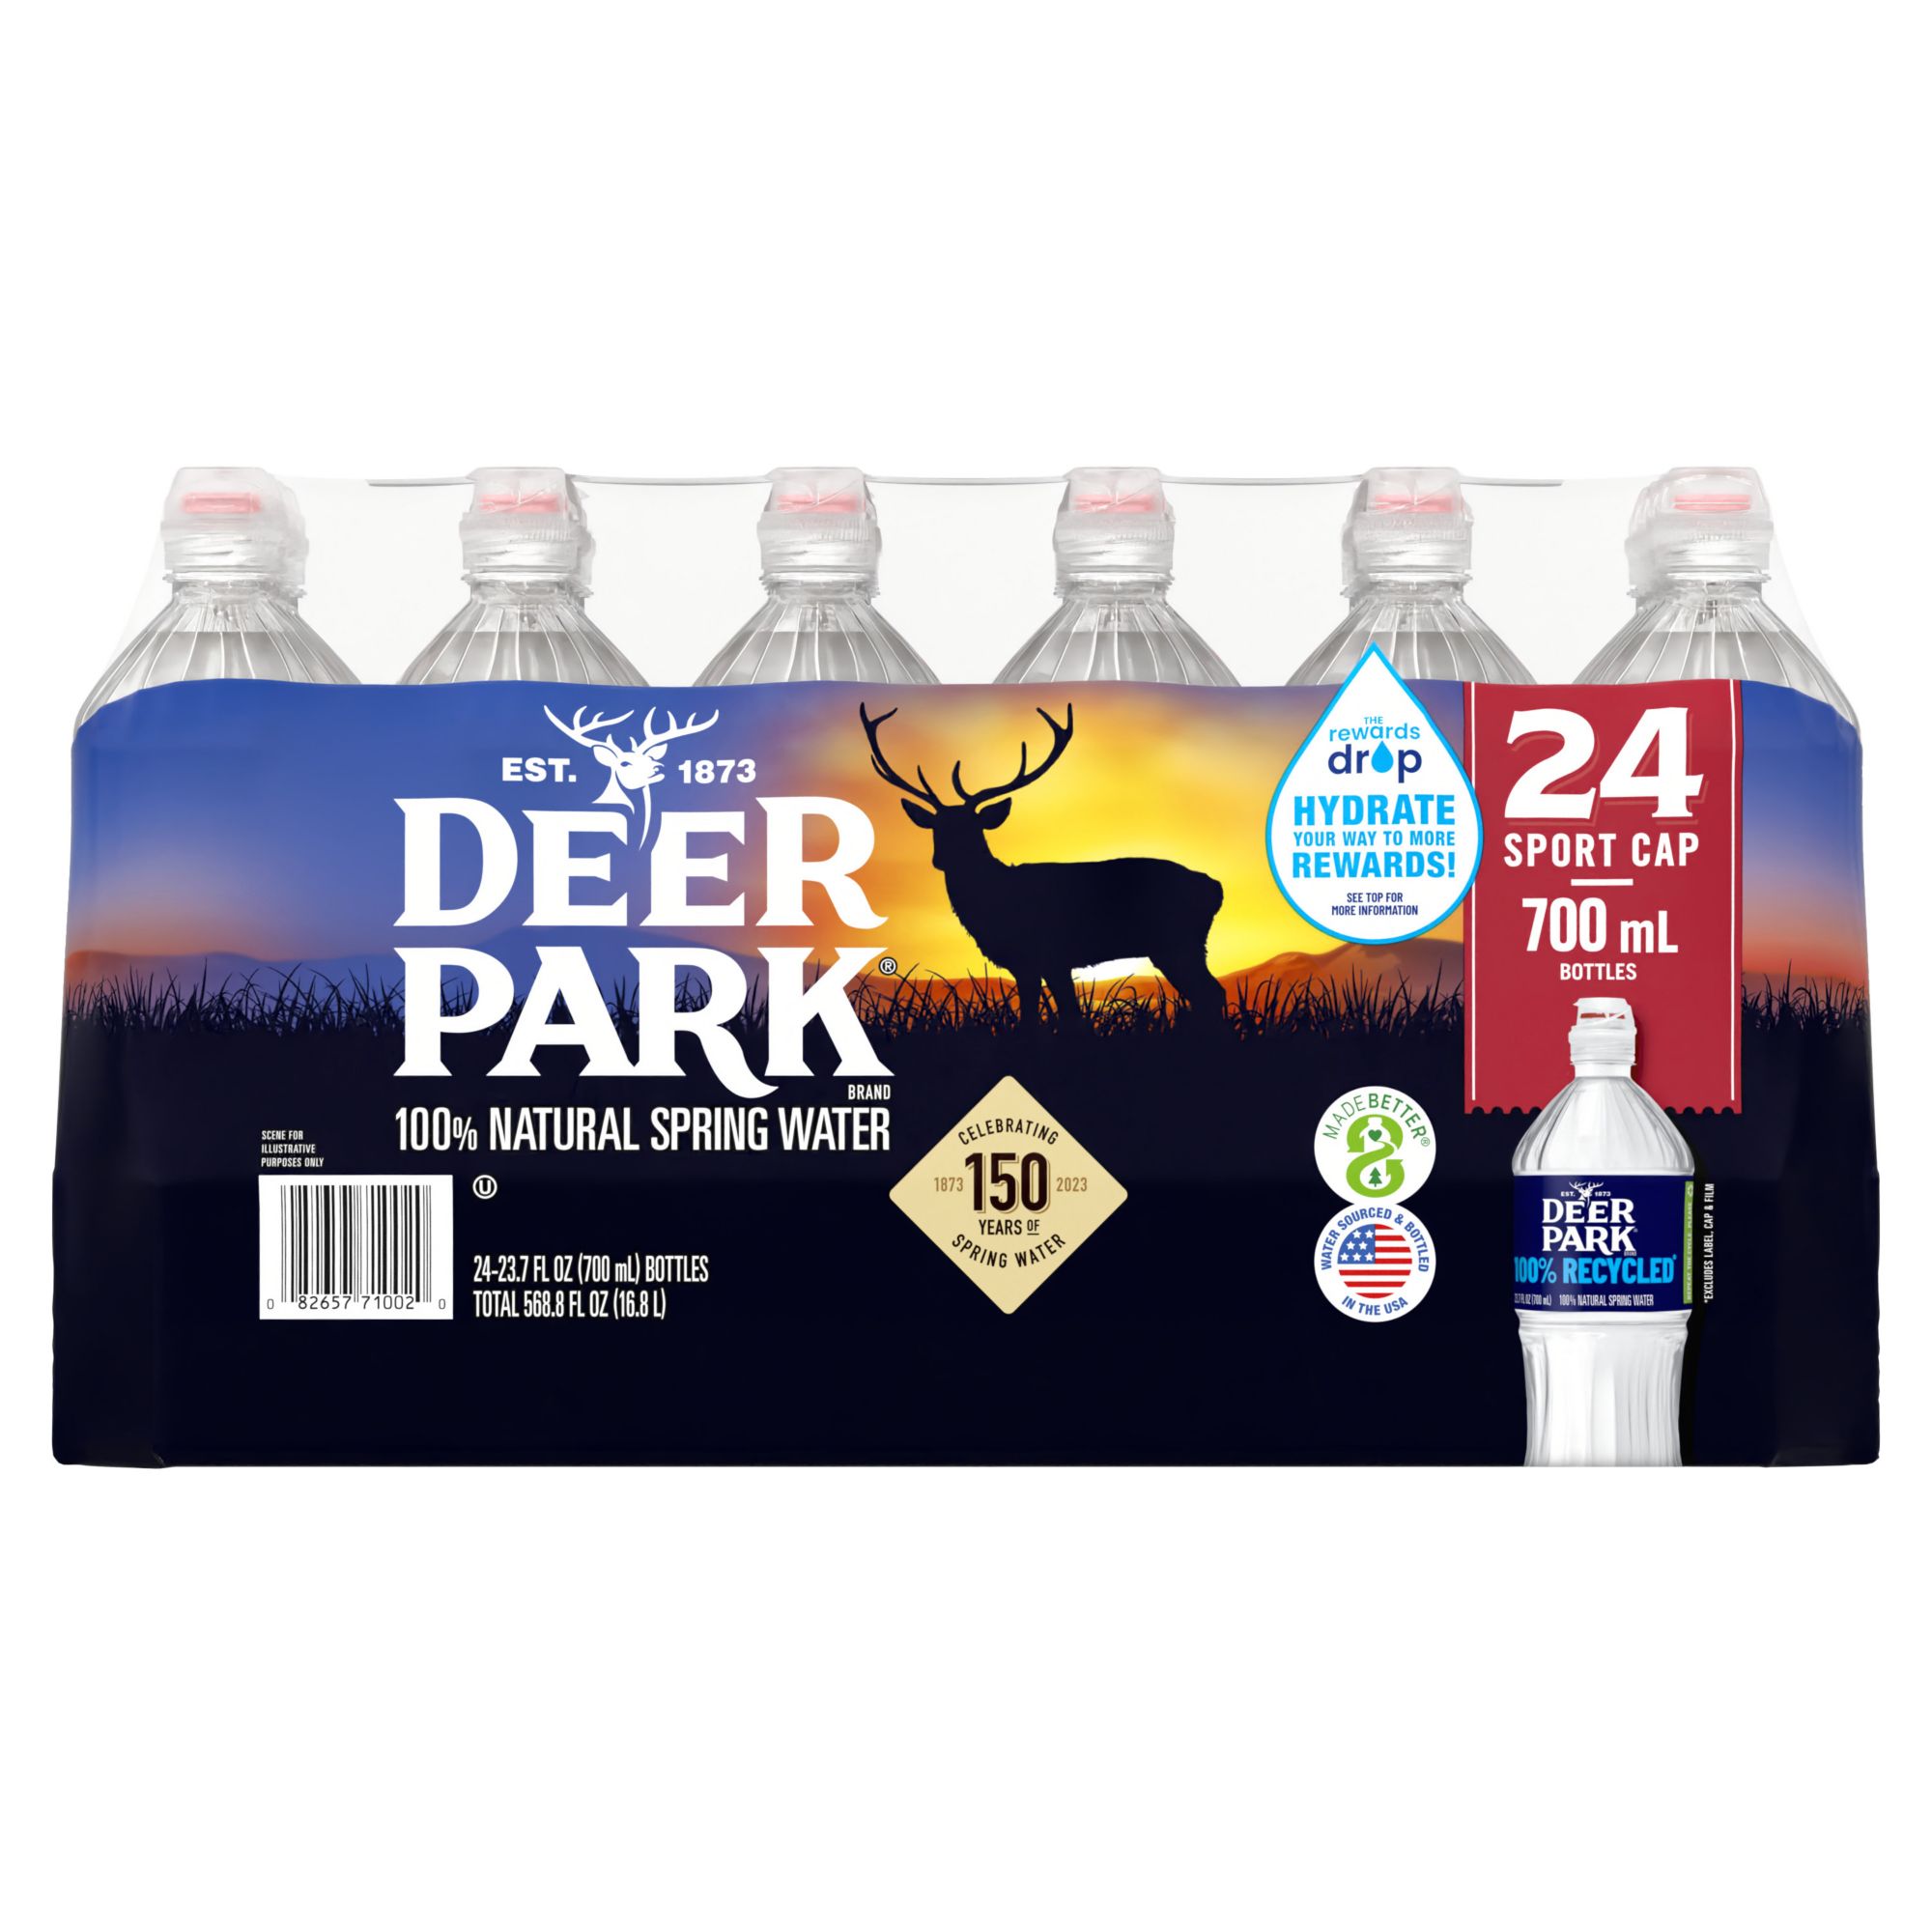 Deer Park 100% Natural Spring Water with Sports Cap, 24 pk.